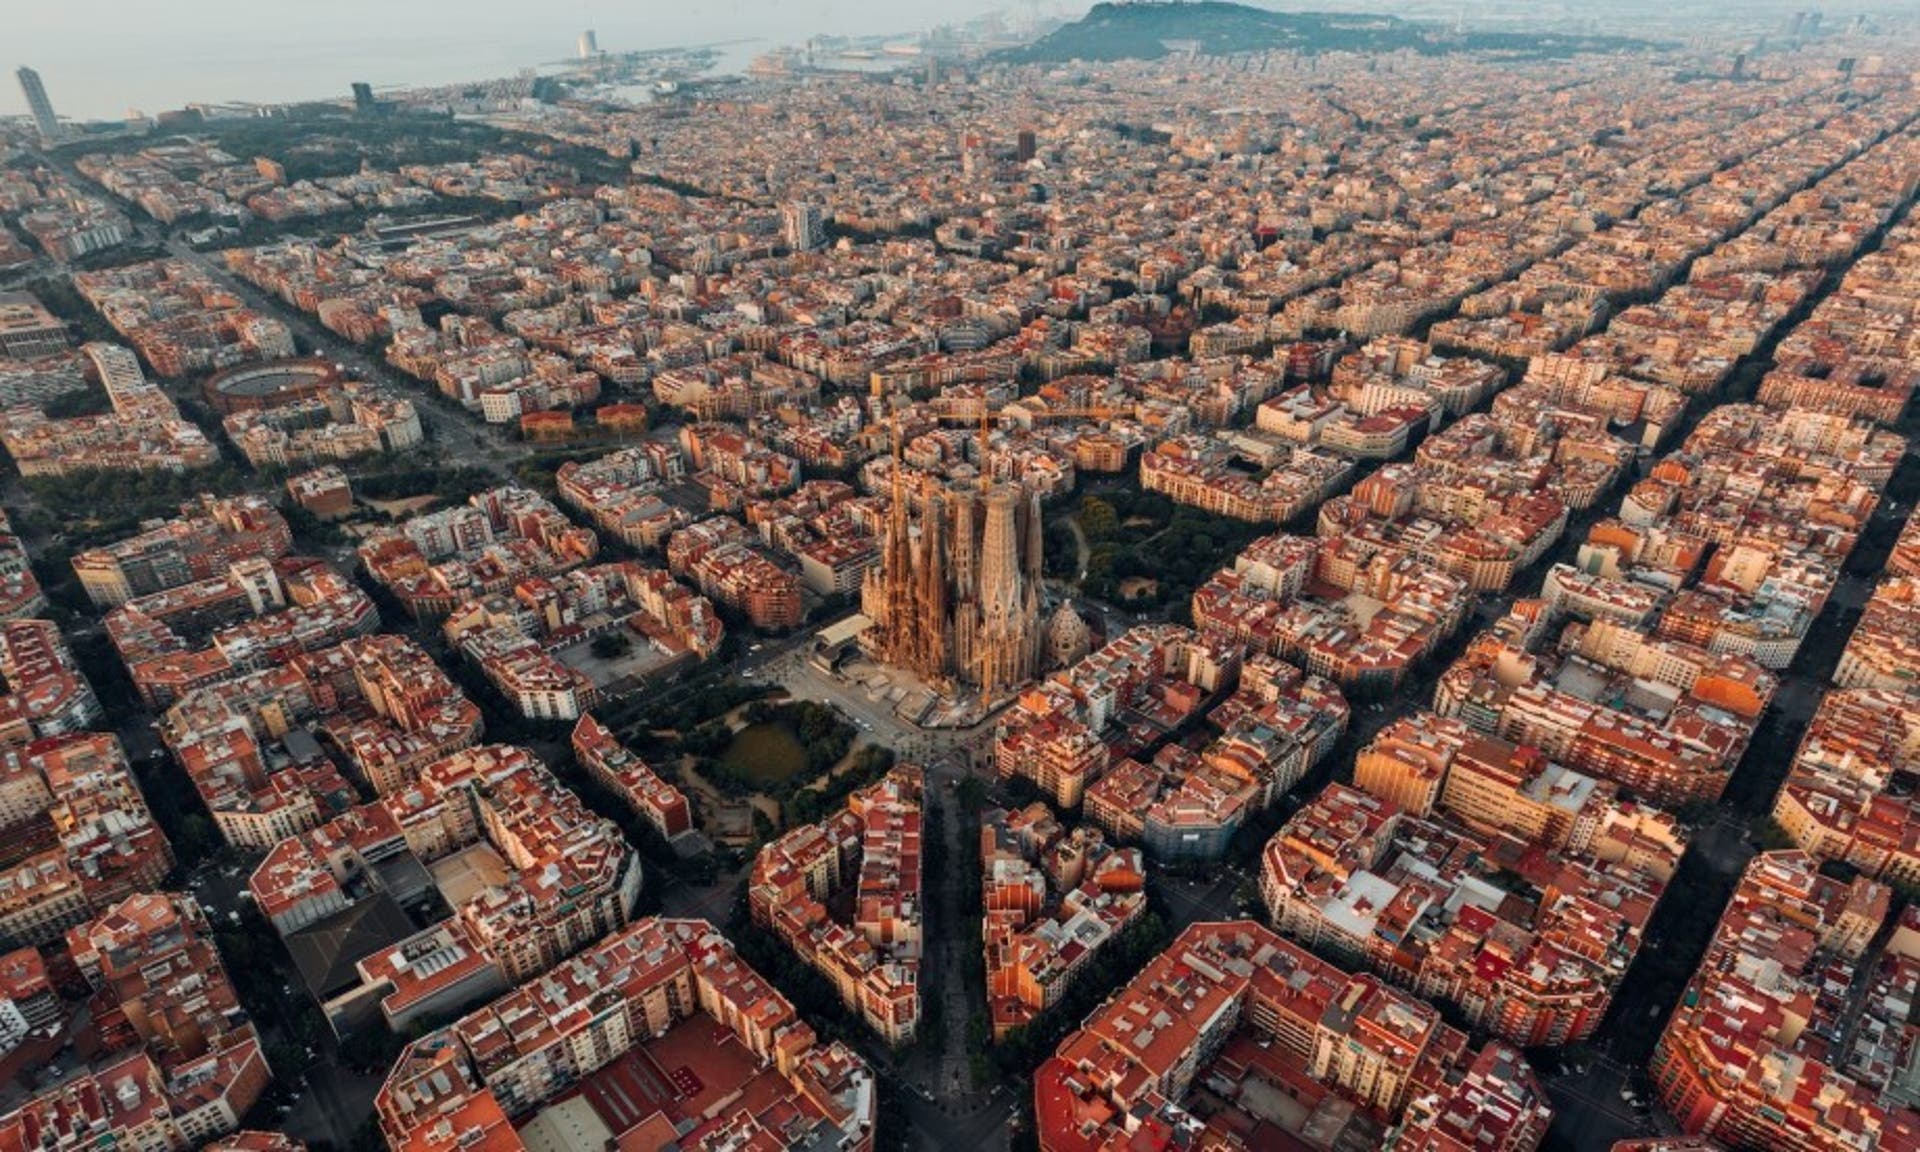  A birds eye image of the city of Barcelona, with the Sagrada Familia at the centre 